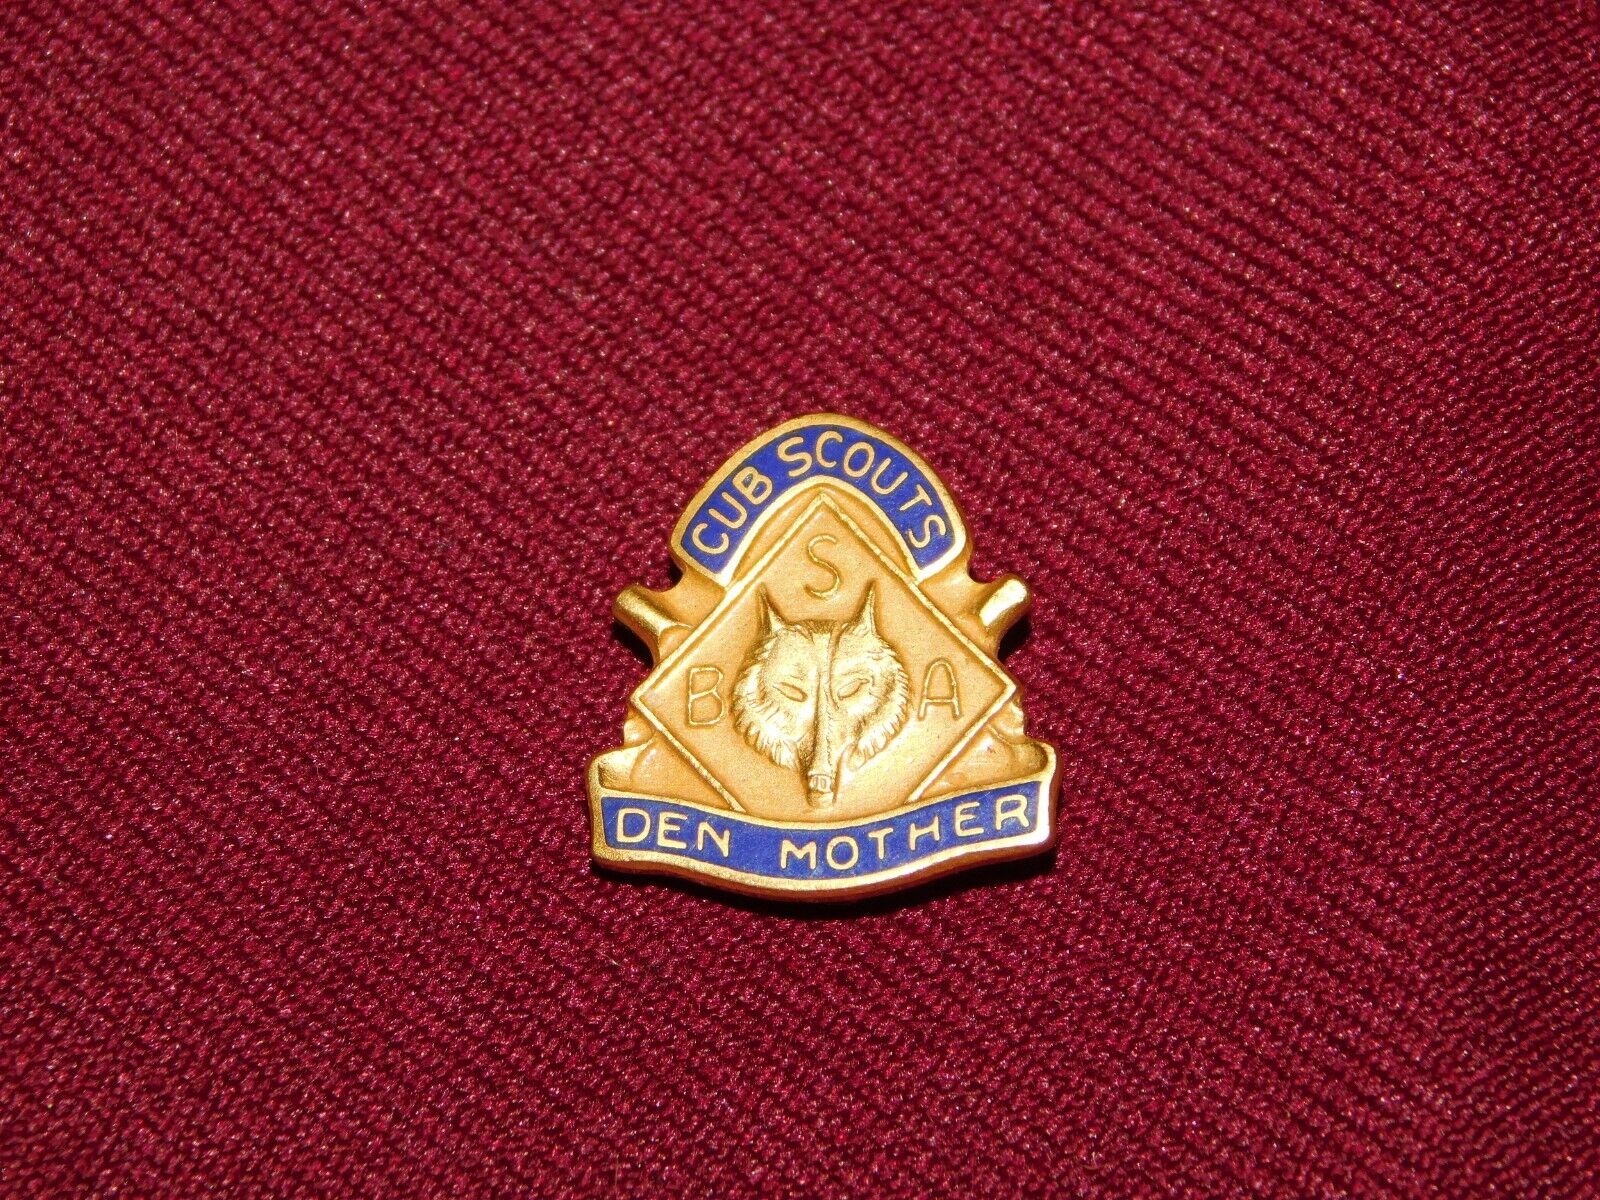 VINTAGE BSA  BOY SCOUTS OF AMERICA CUB SCOUTS DEN MOTHER PIN